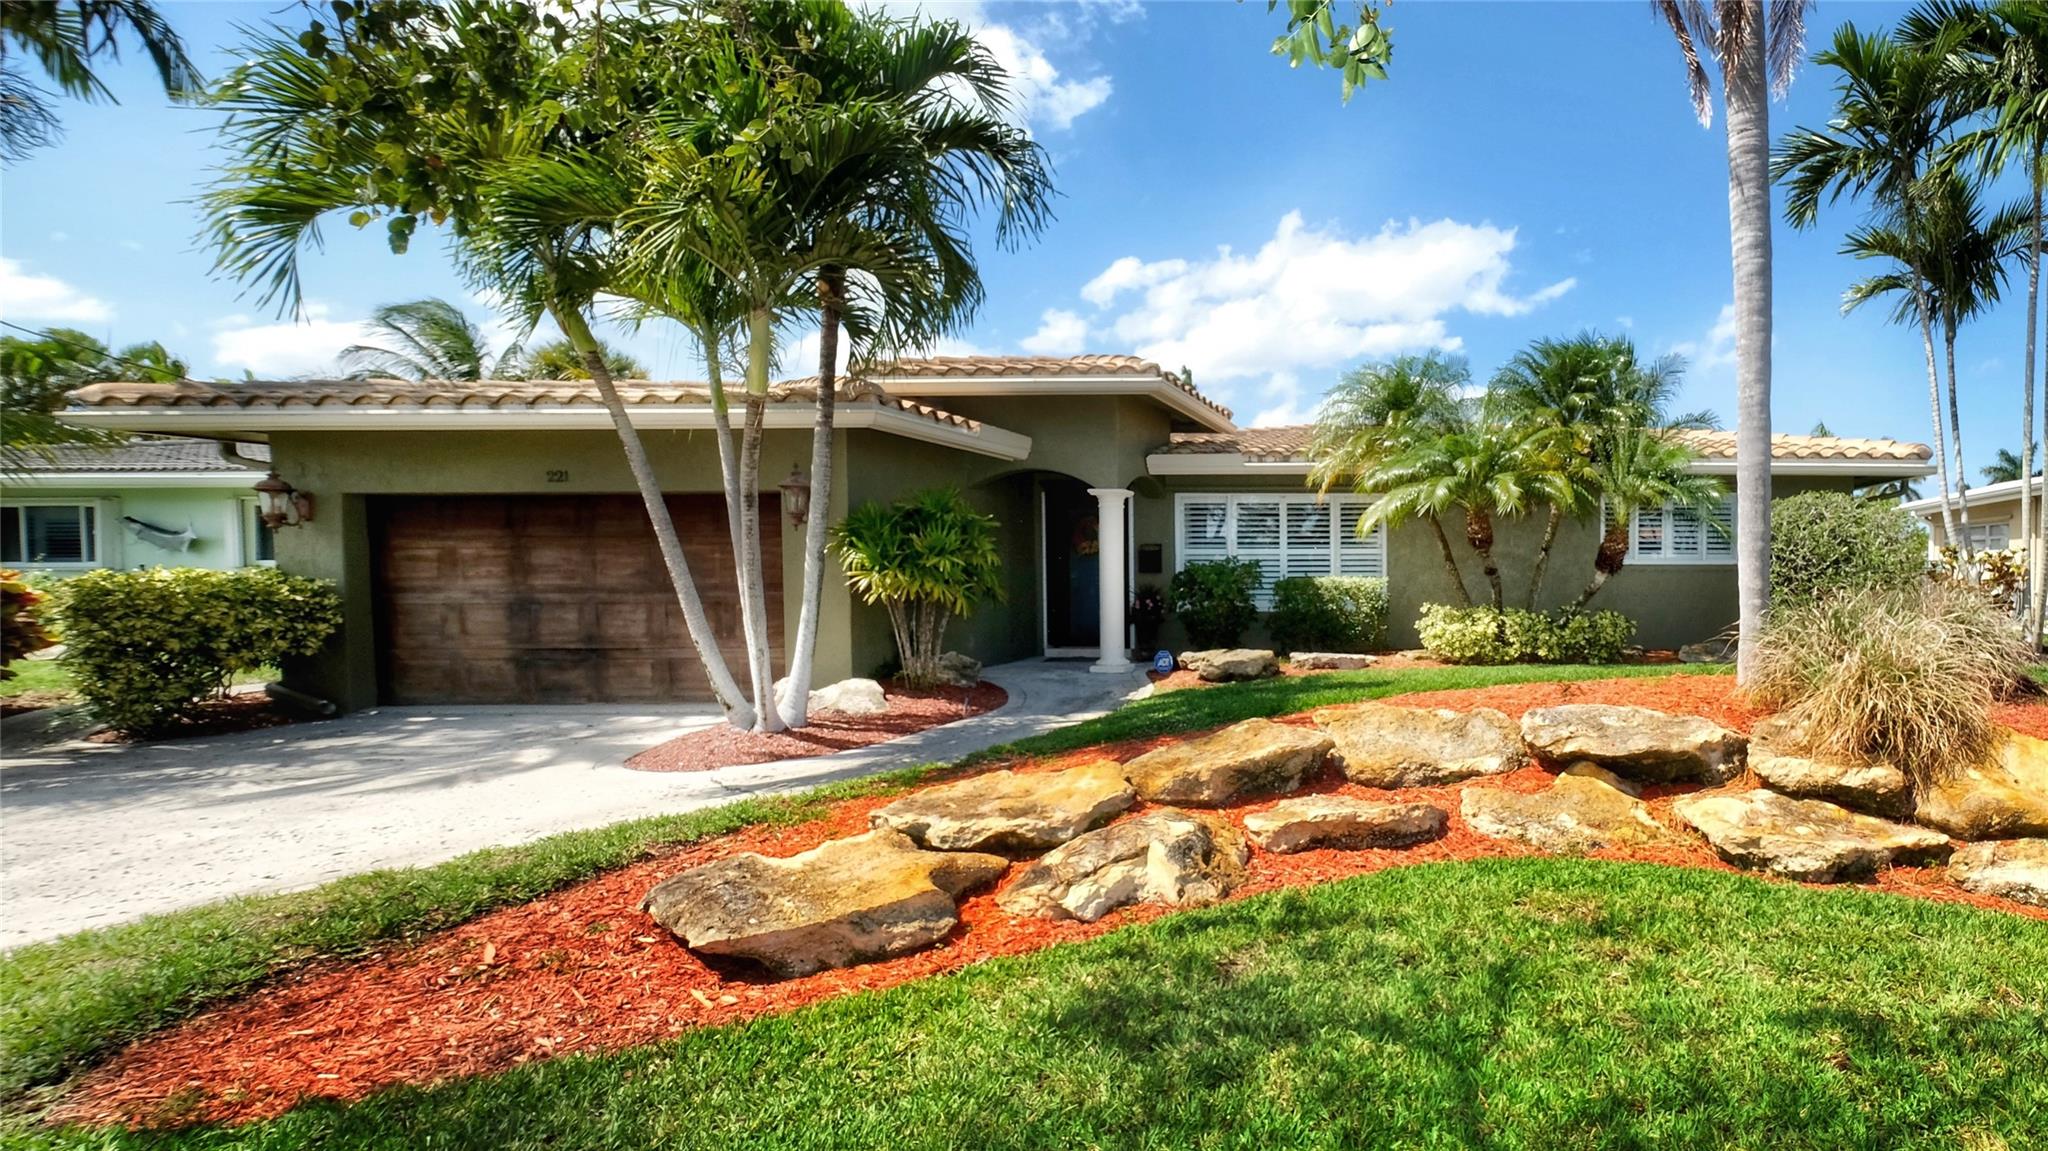 REDUCED!!!!   Feel the warmth and charm of this updated waterfront home located in East Pompano Beach!!! As you immediately enter the front door you are welcomed by a formal living room featuring a double sided wood burning fireplace. The 18" travertine floor will then guide you through the remodeled kitchen with granite counter tops into a HUGE second living room combined with a large dining area, fireplace, and spacious laundry room. The 2 sets of double doors open onto to a brick paver patio leading to a commercial grade CONCRETE seawall built to todays current building code along with a 10,000 boat lift. The spacious master suite offers a remodeled bathroom tastefully finished with an oversized shower, large walk in closet, and double doors opening to a small deck. NO HOA!!!